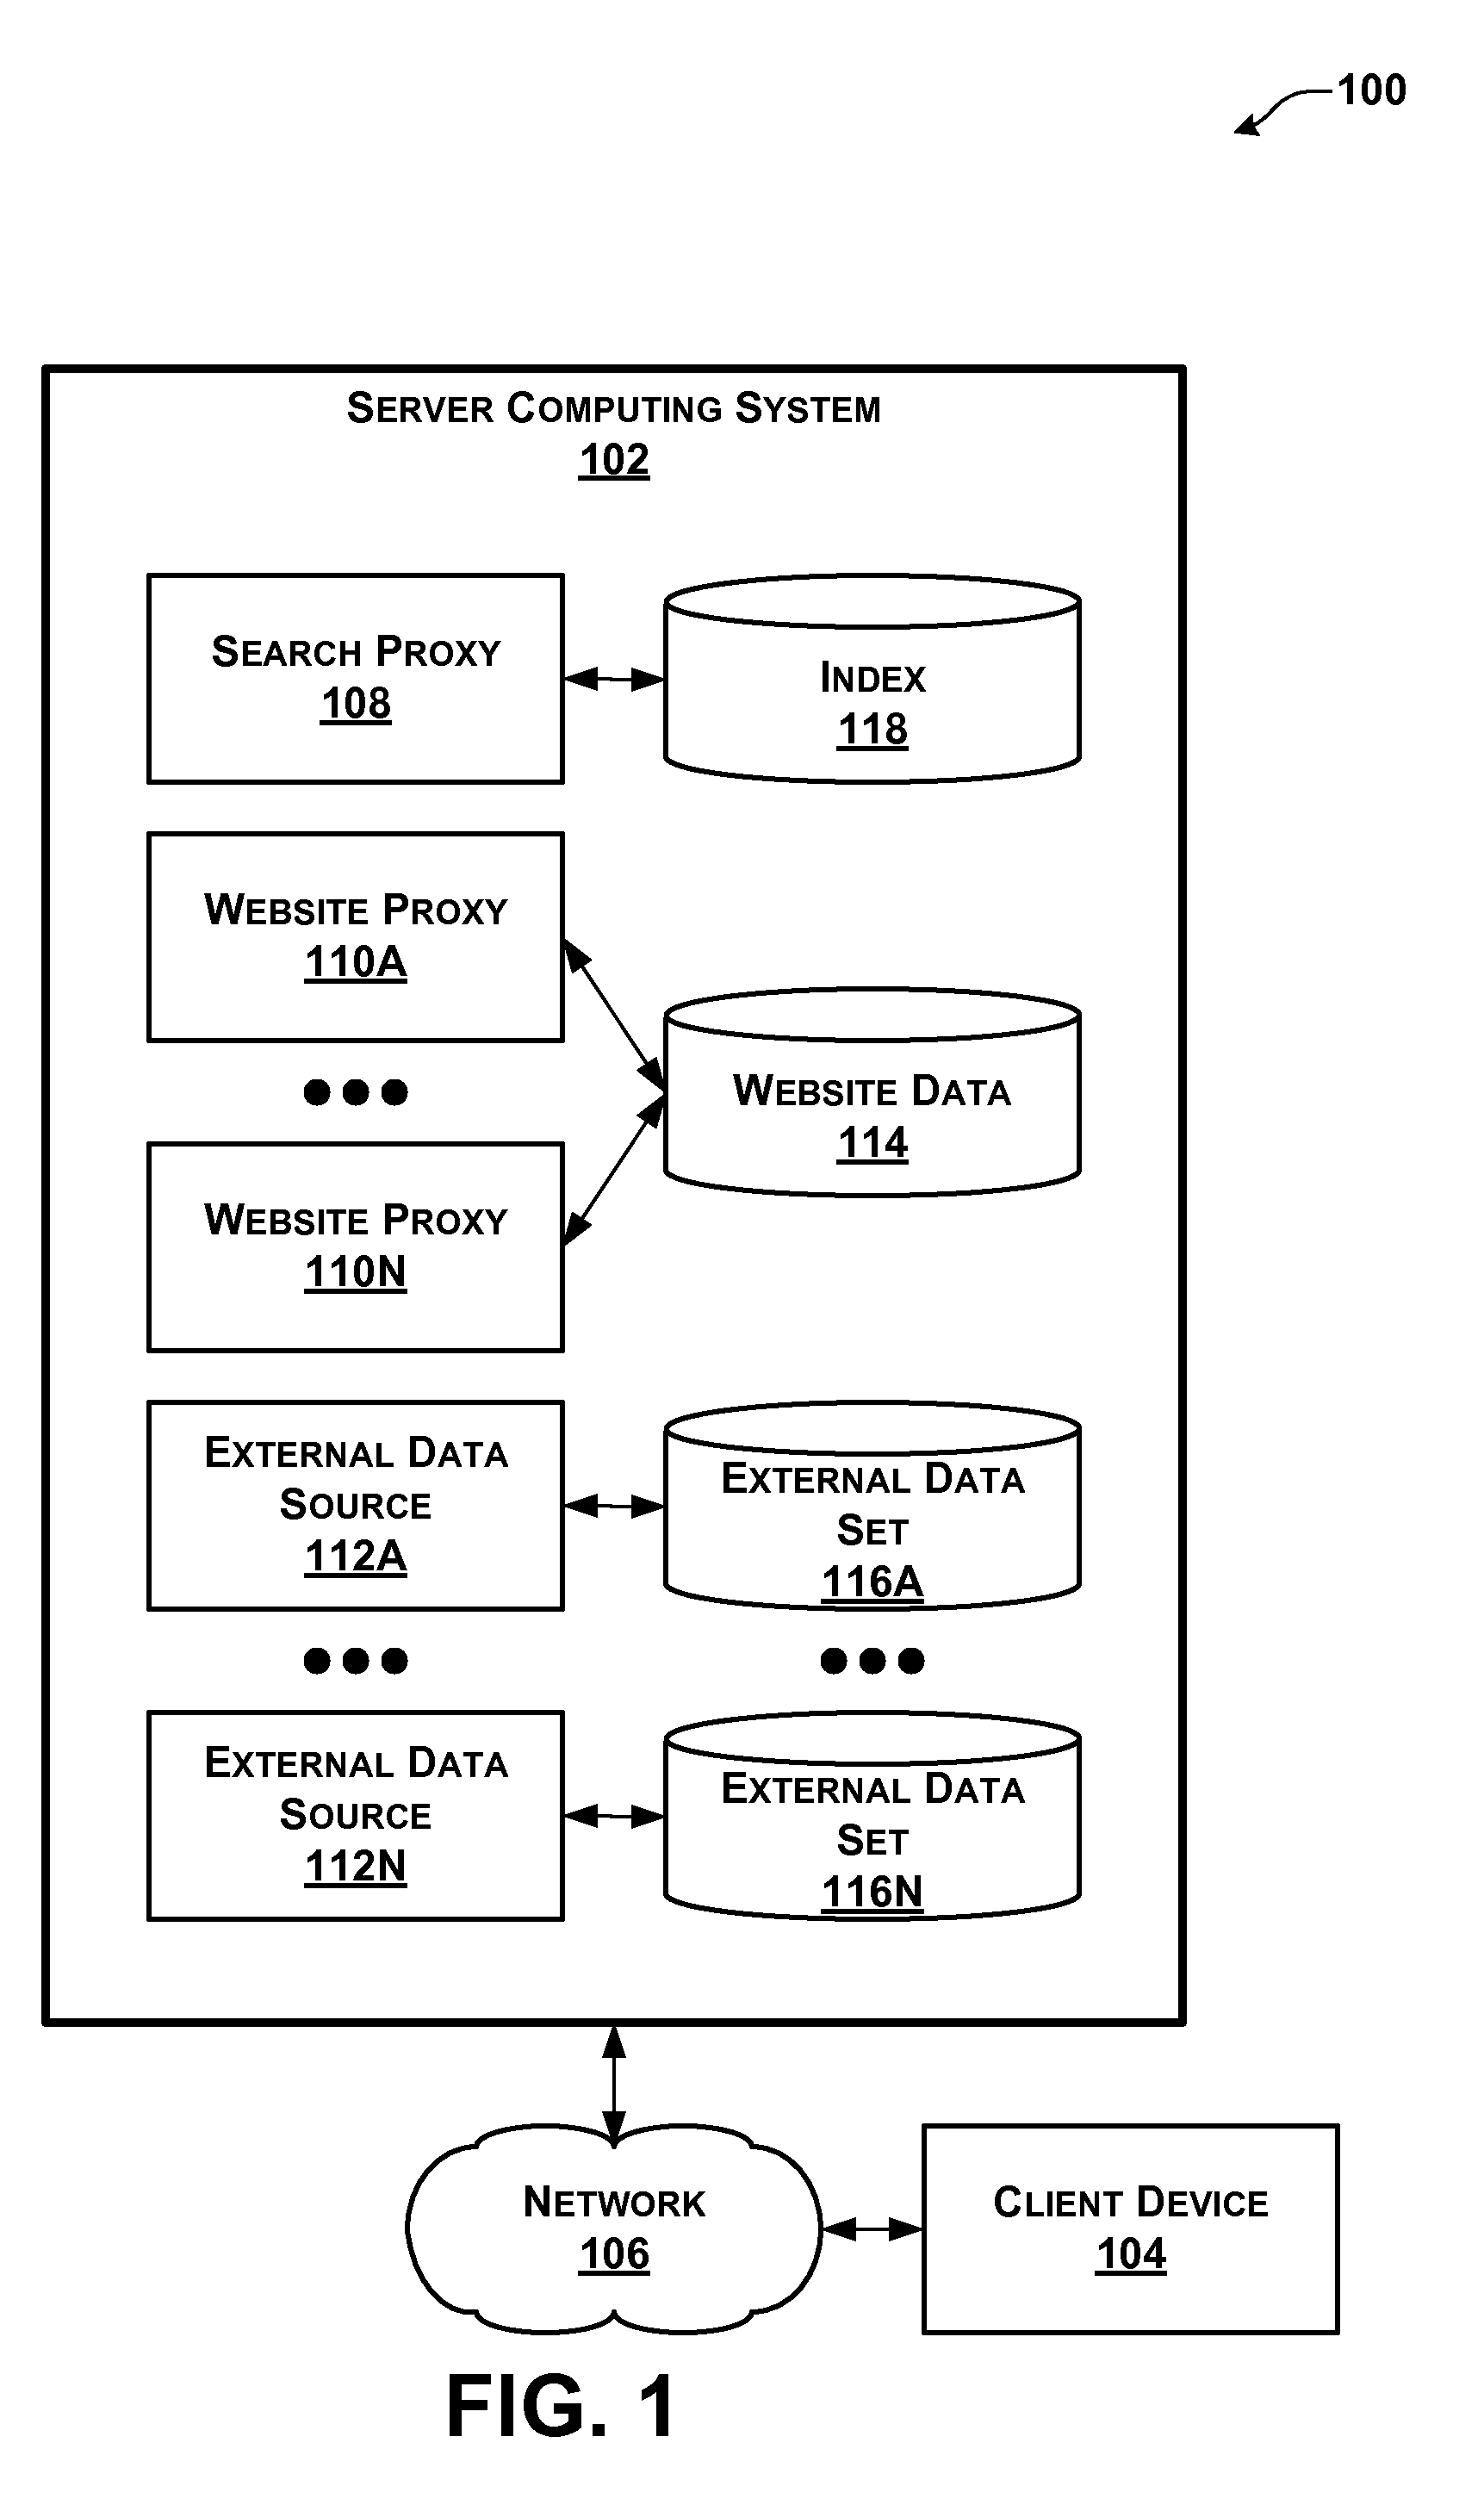 Indexing of Partitioned External Data Sources